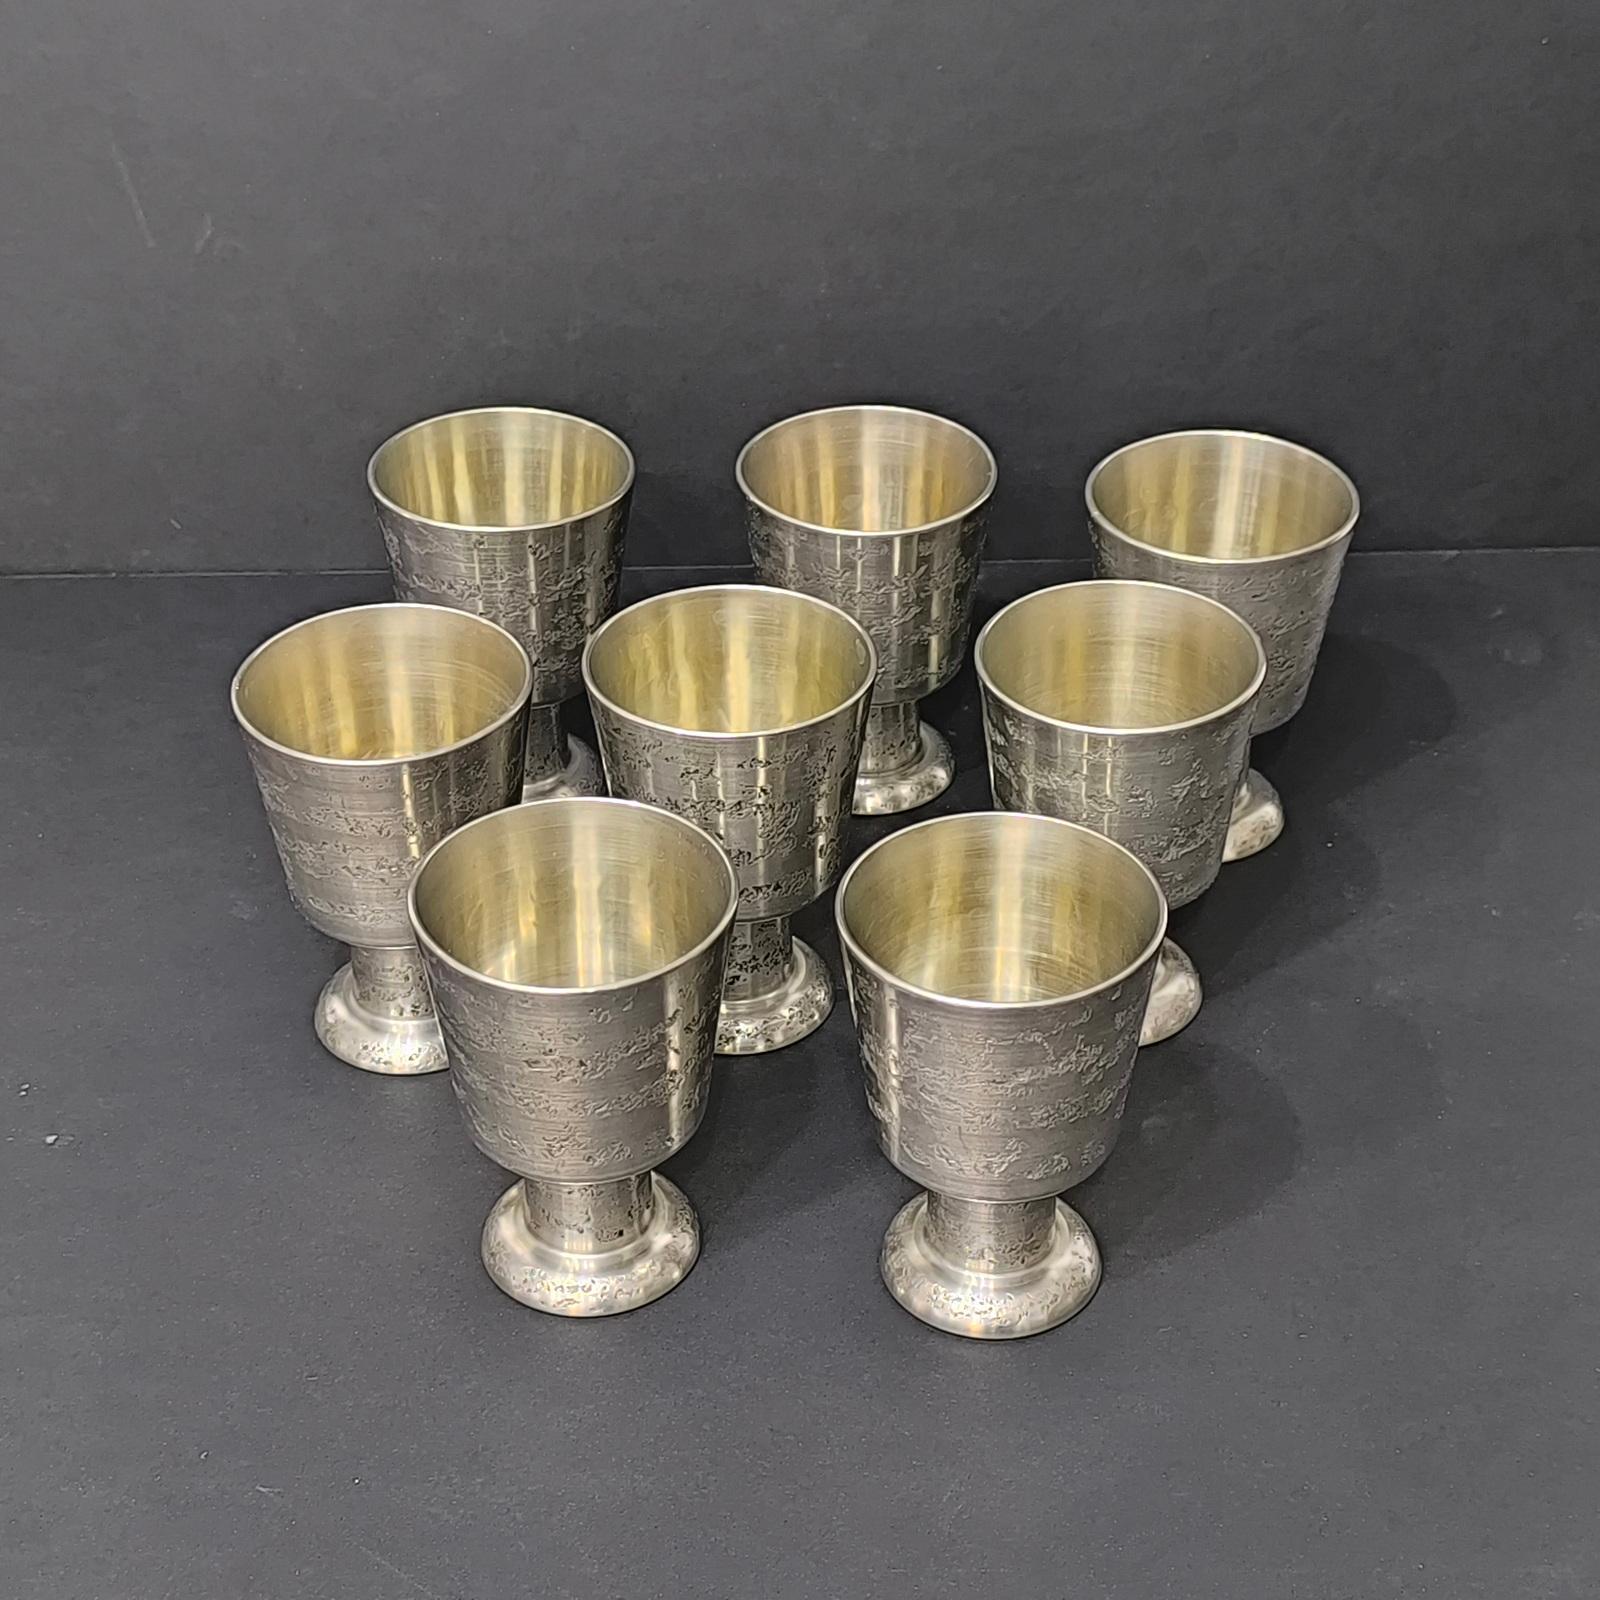 Vintage Pewter Cocktail Shaker Set of 32 Pieces, Viking Style, Norway 1970s For Sale 2